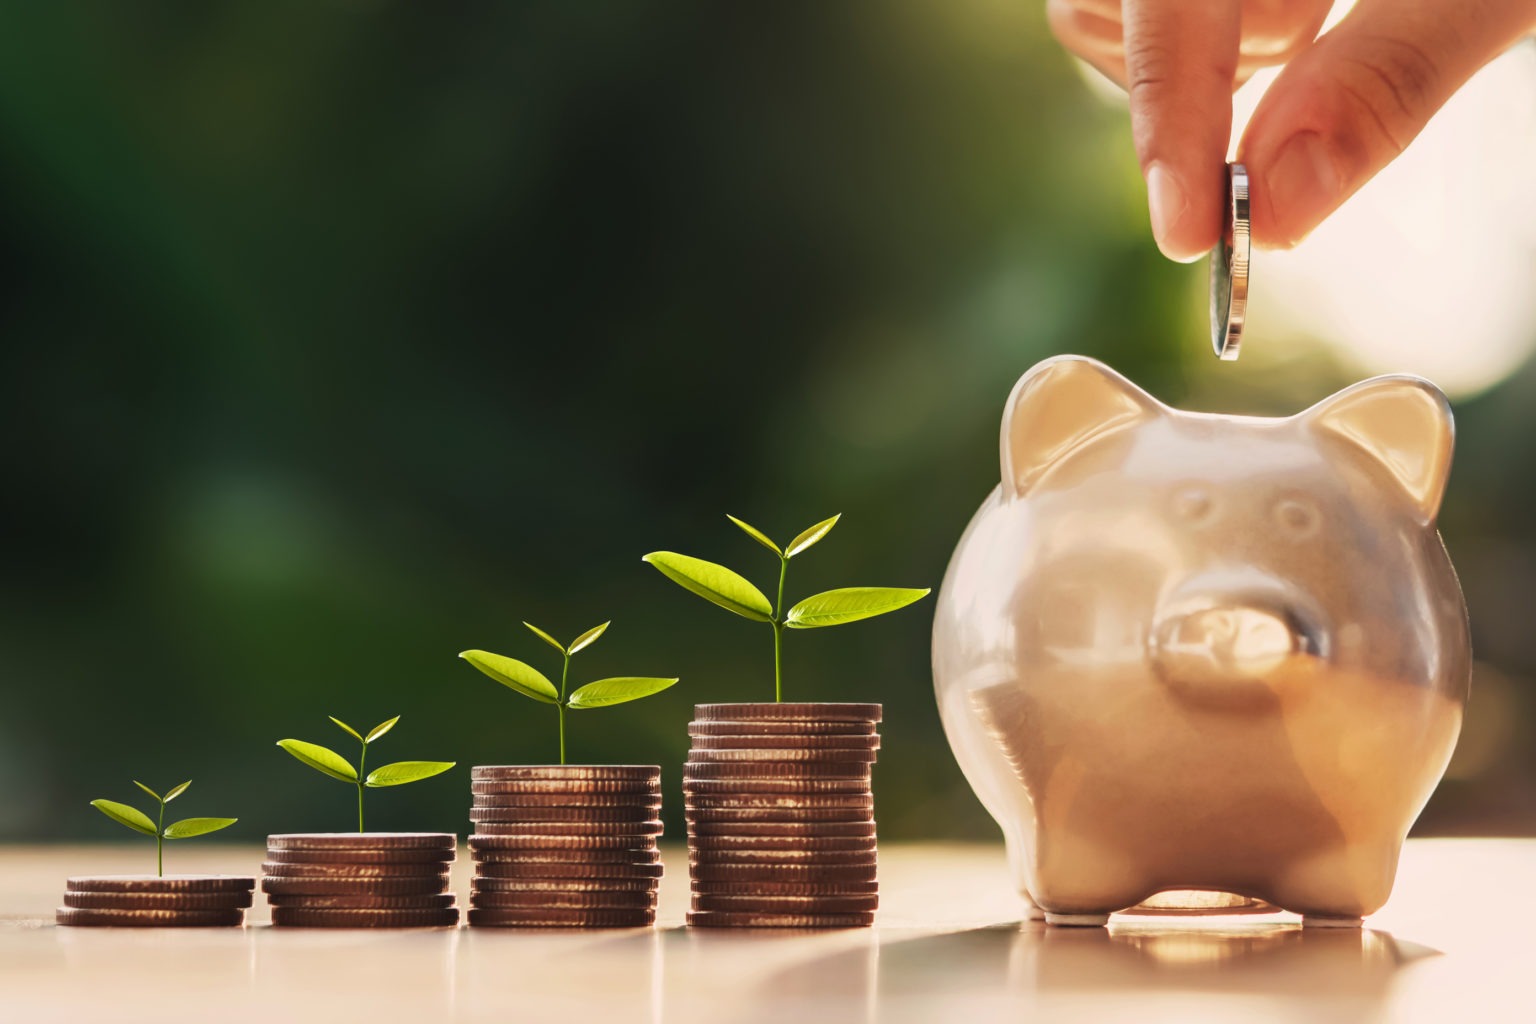  A hand dropping a coin into a piggy bank representing saving money with small plants growing out of the coin stacks to symbolize growth of savings over time with interest to afford a budget-friendly vacation.